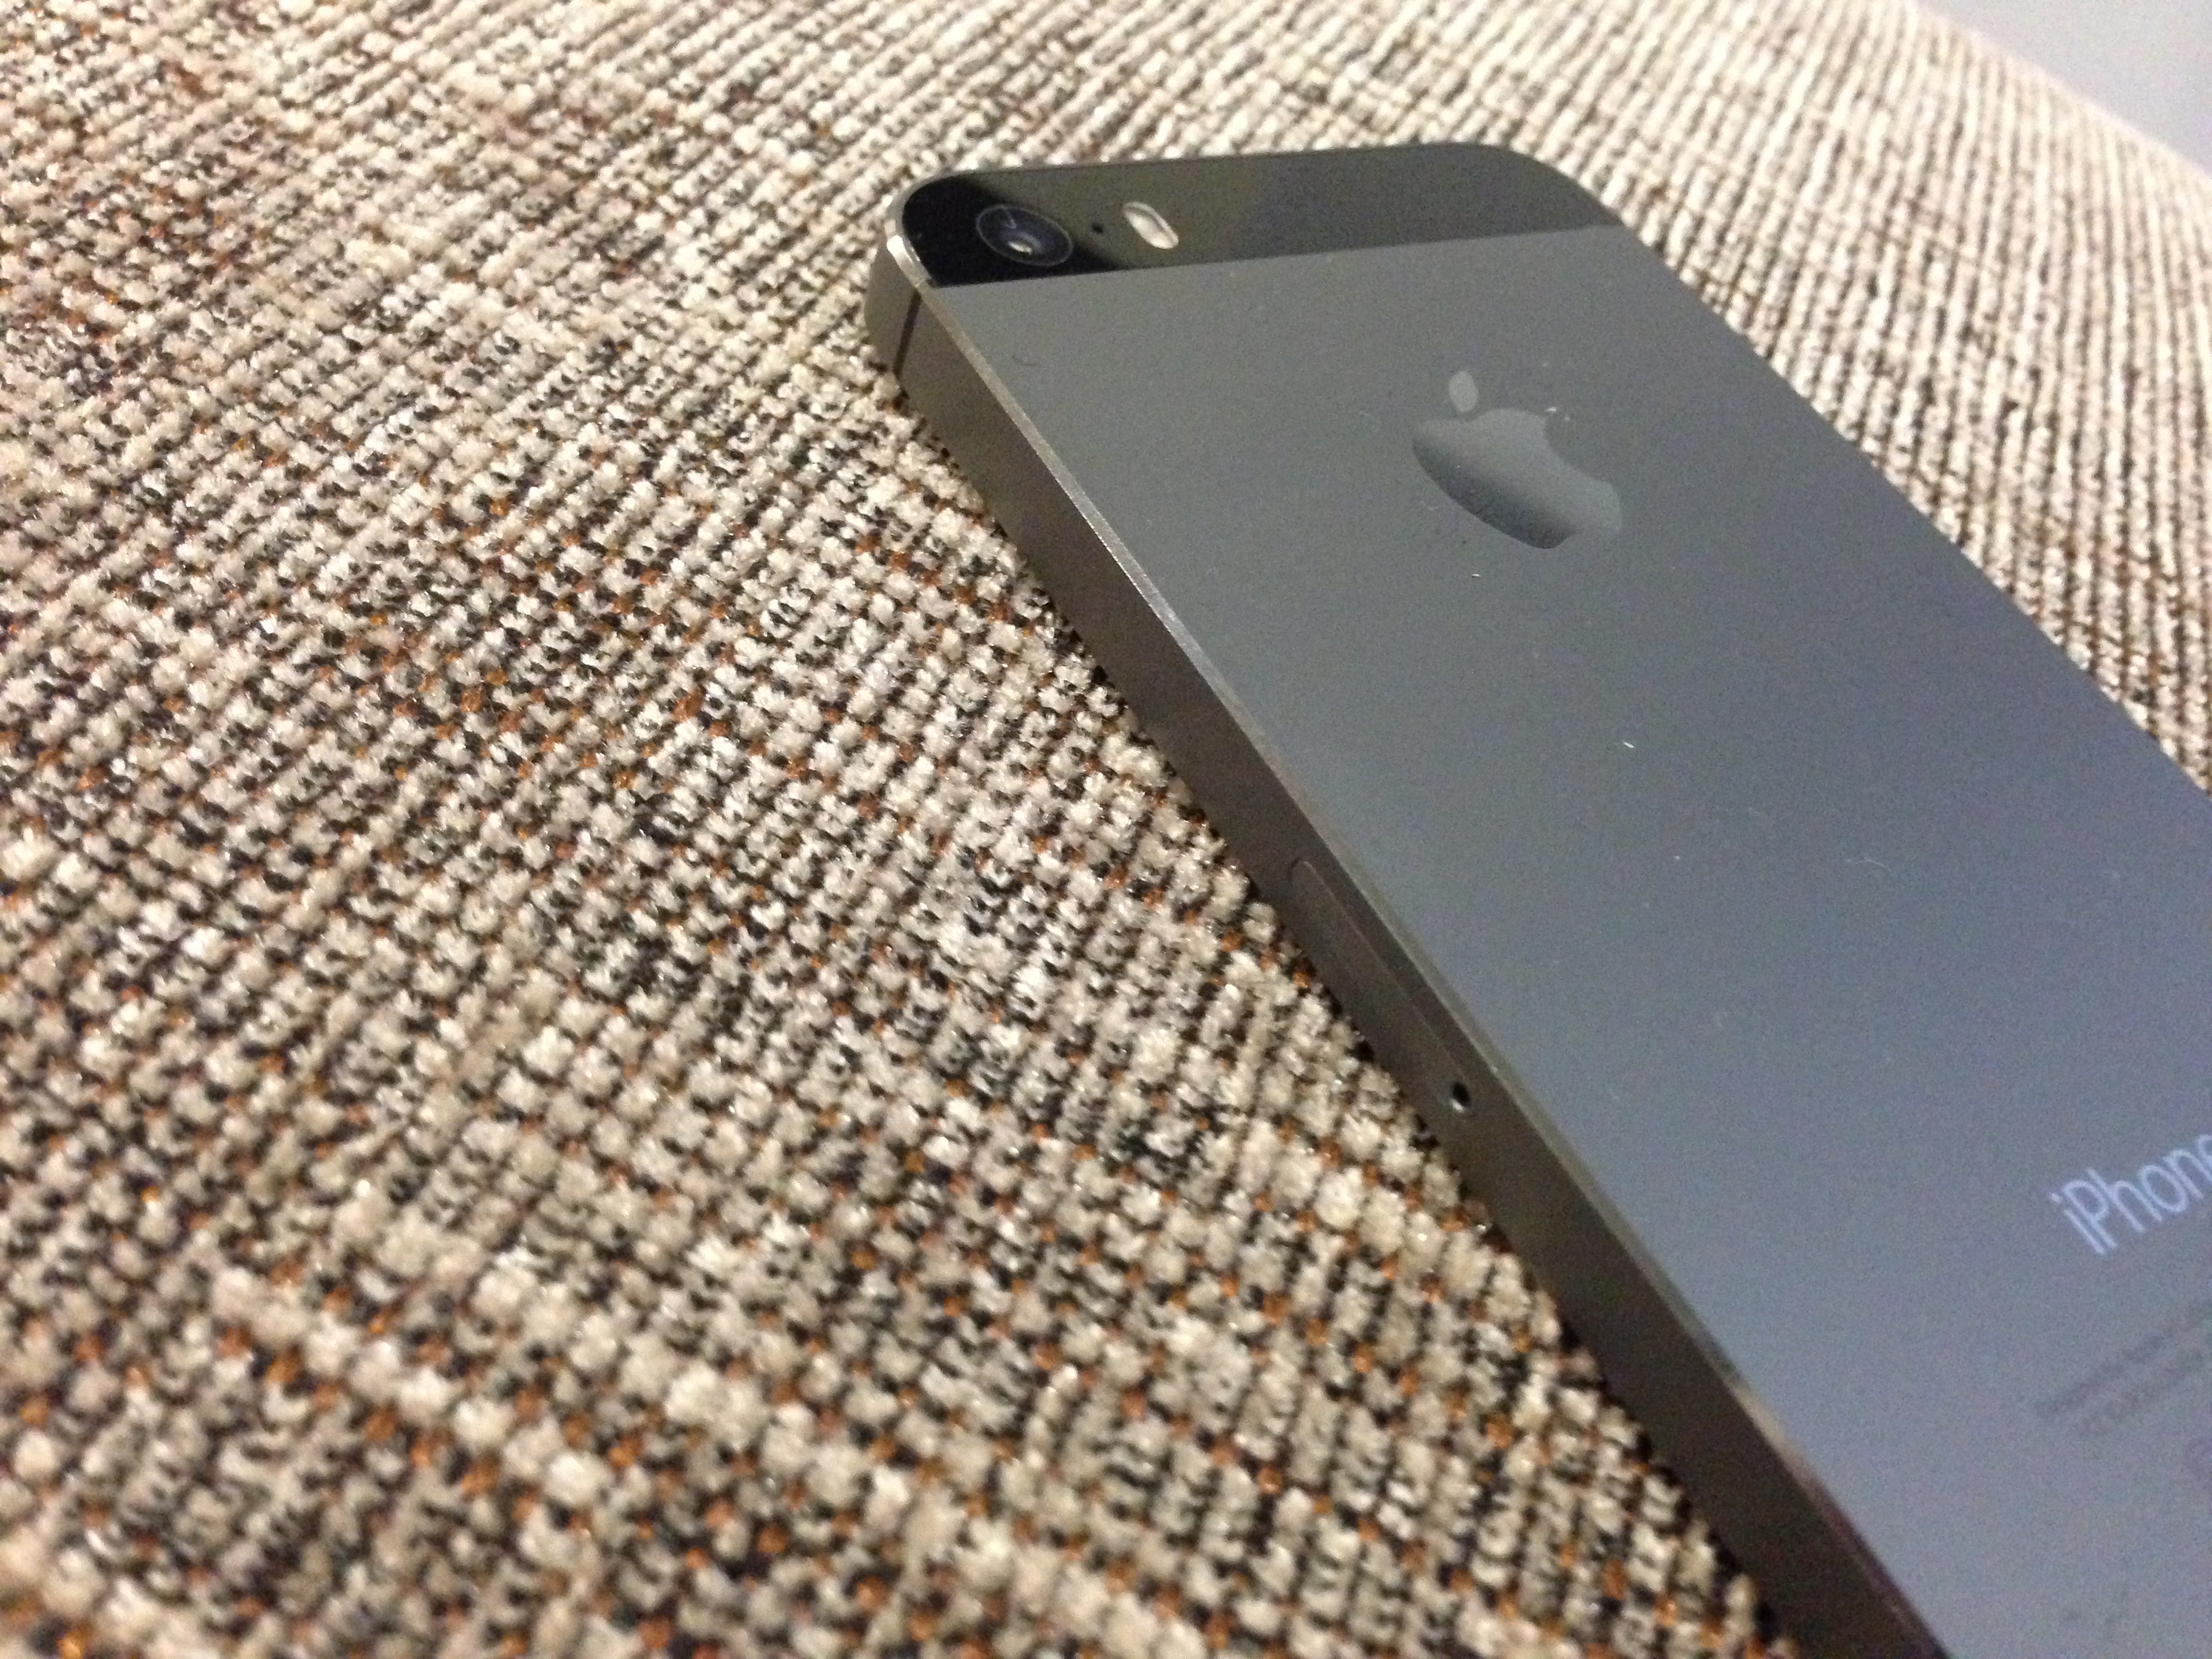 Review: 24 hours with the iPhone 5s... - 9to5Mac